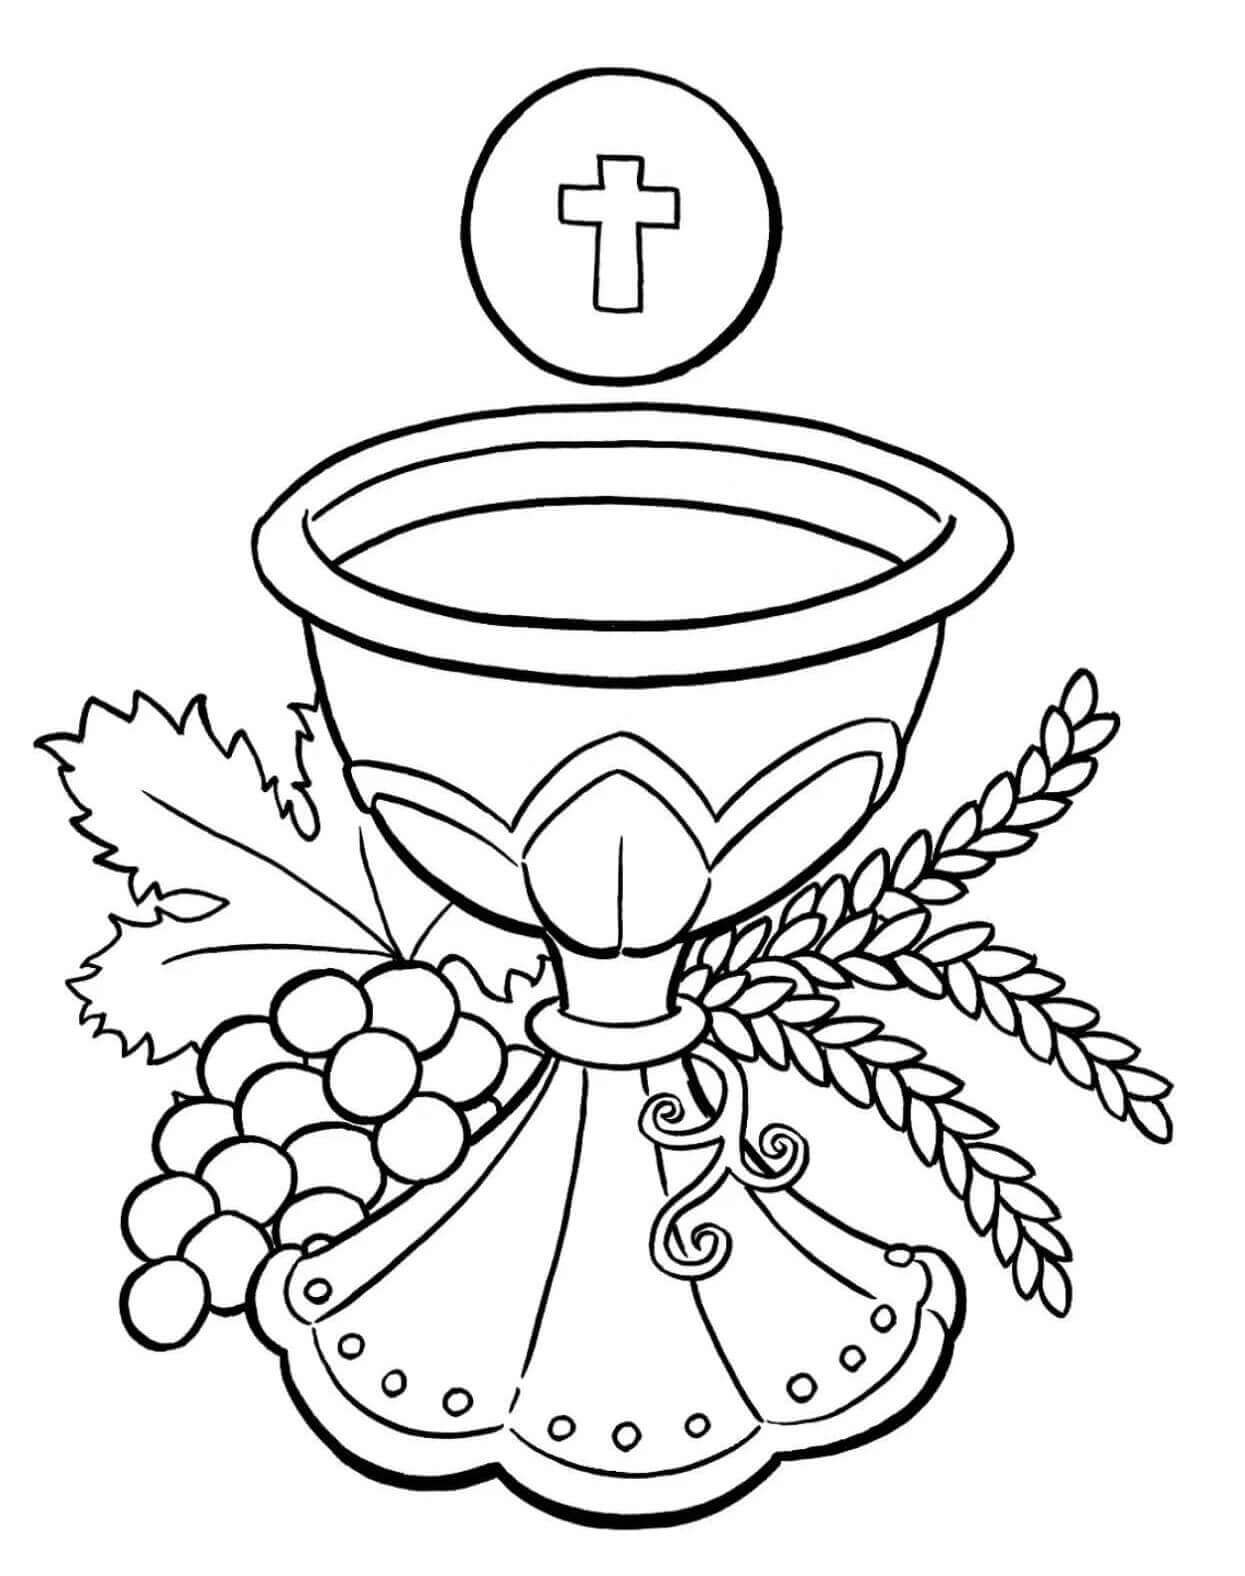 Catholic Coloring Book Pages
 Coloring Page For Catholic Schools Week Bltidm